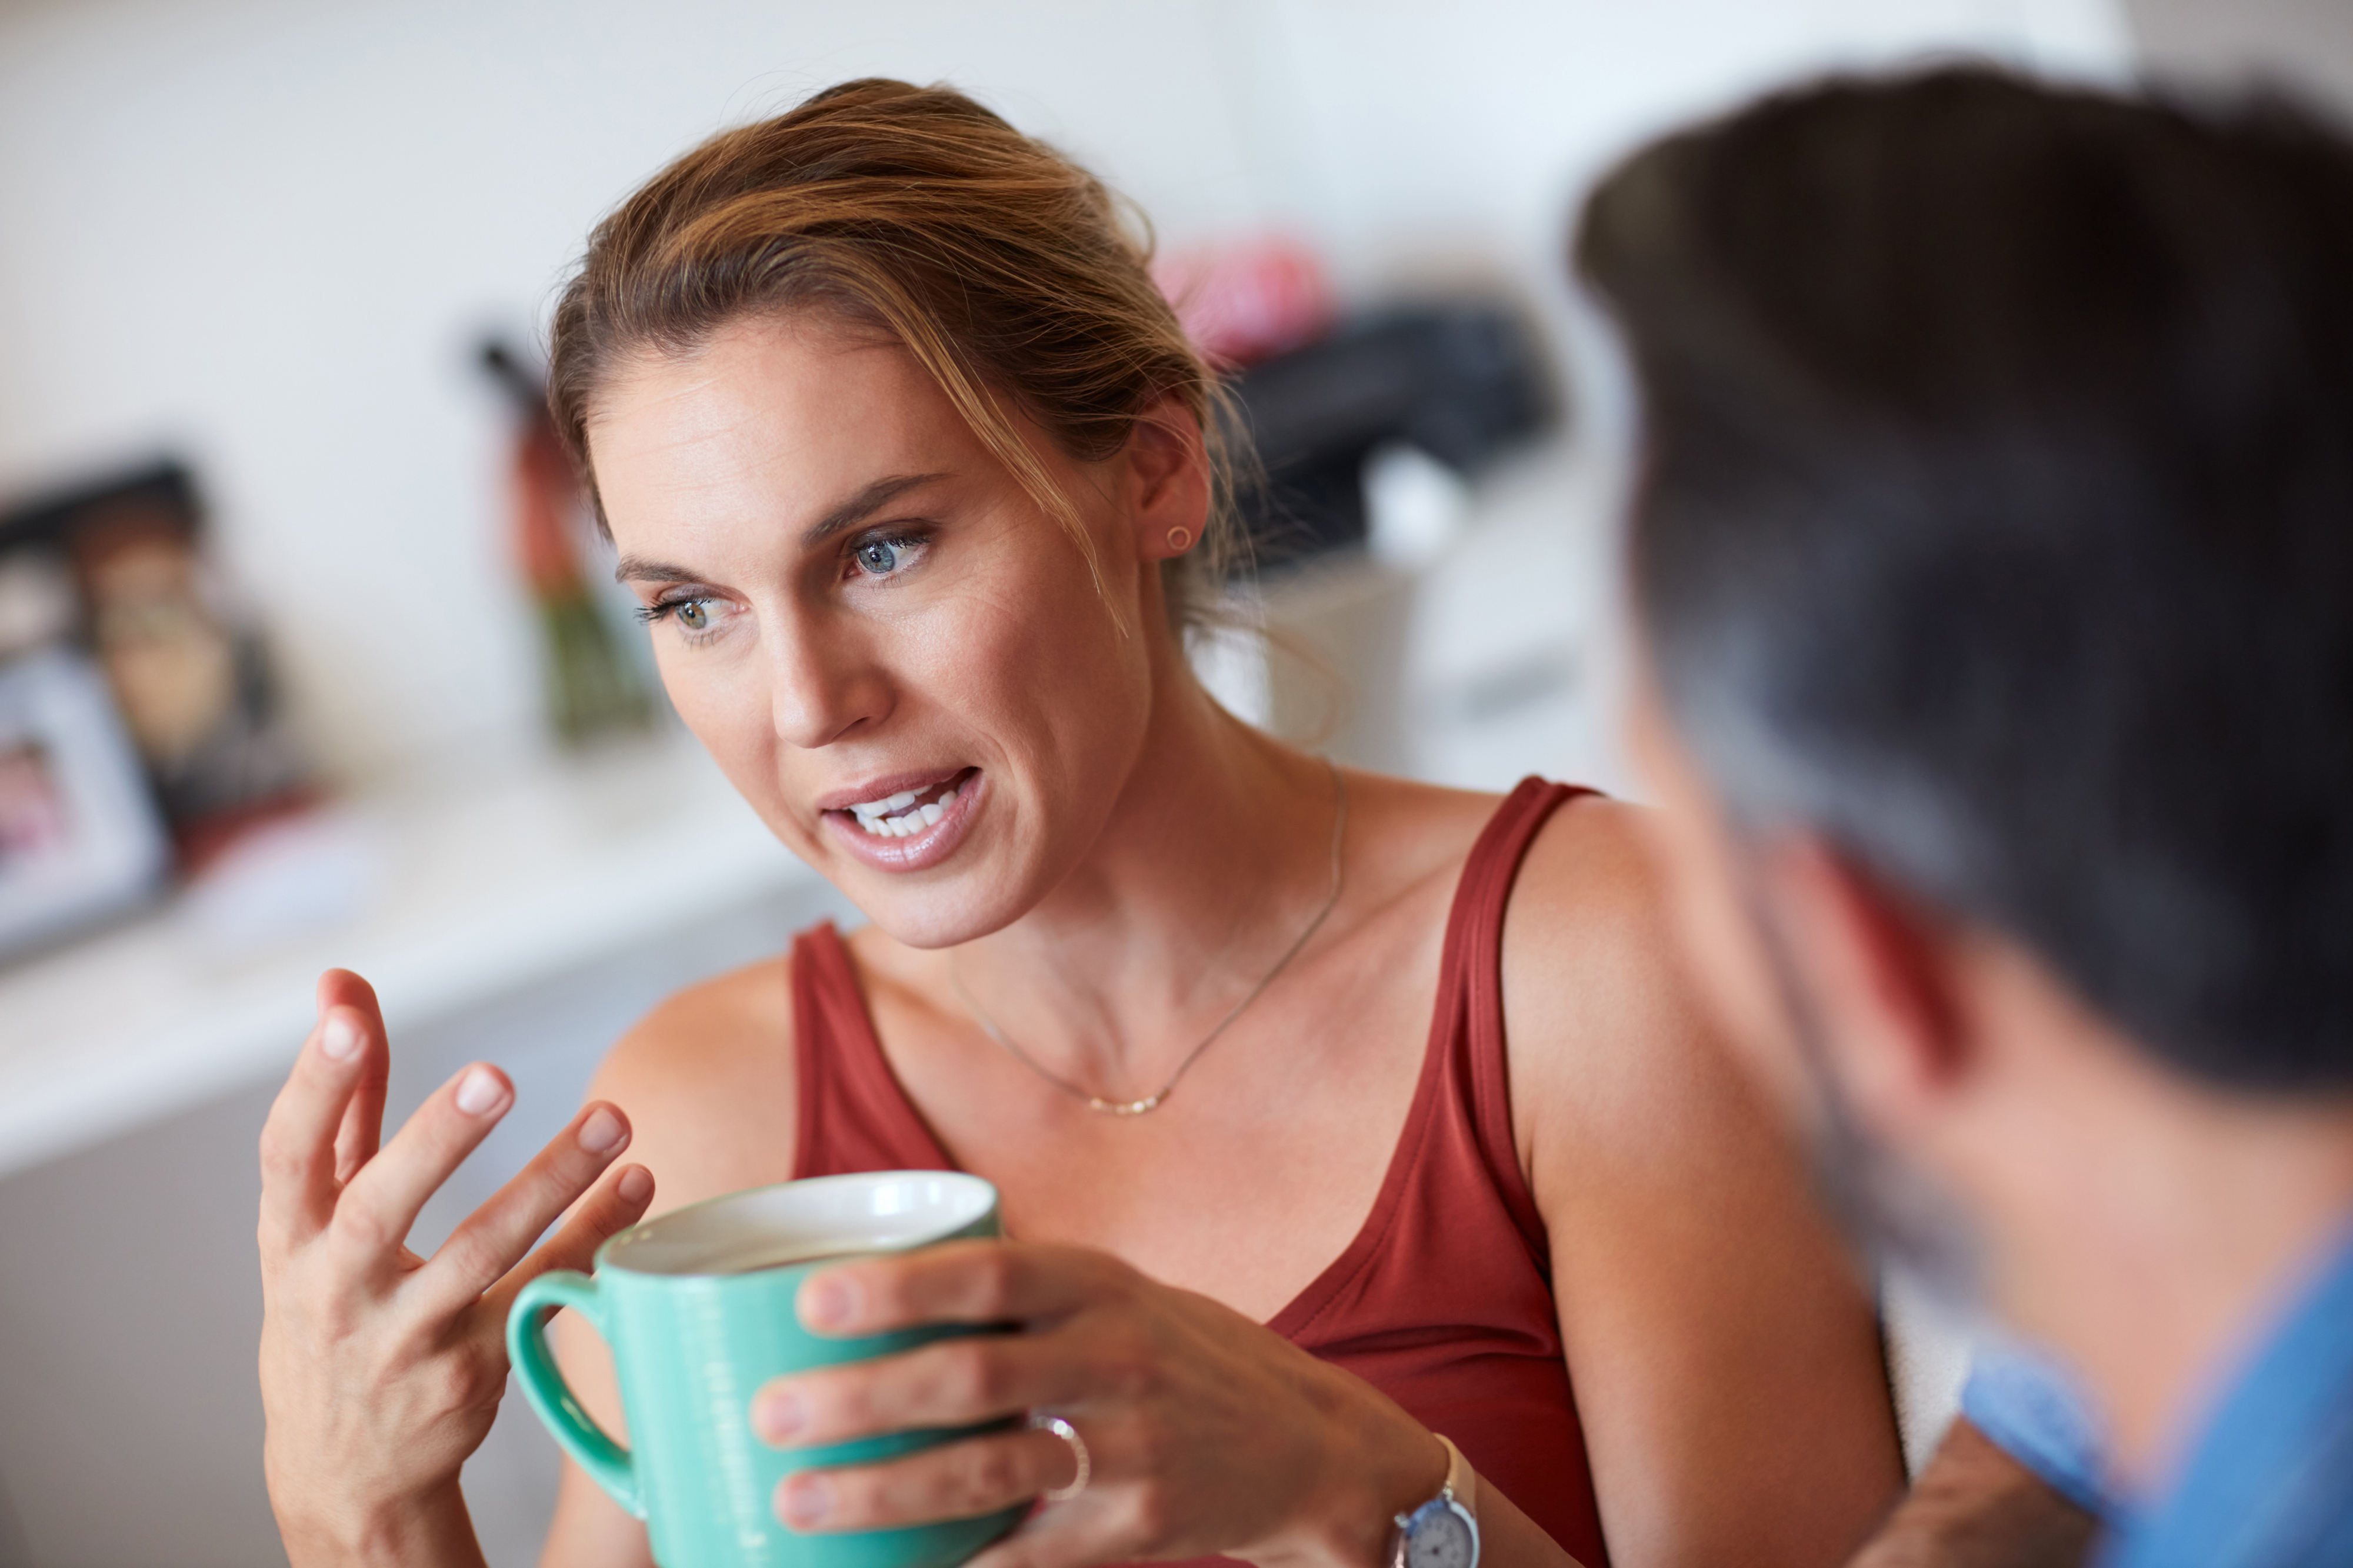 Woman holding a mug and talking to a man, both are casually dressed and indoors